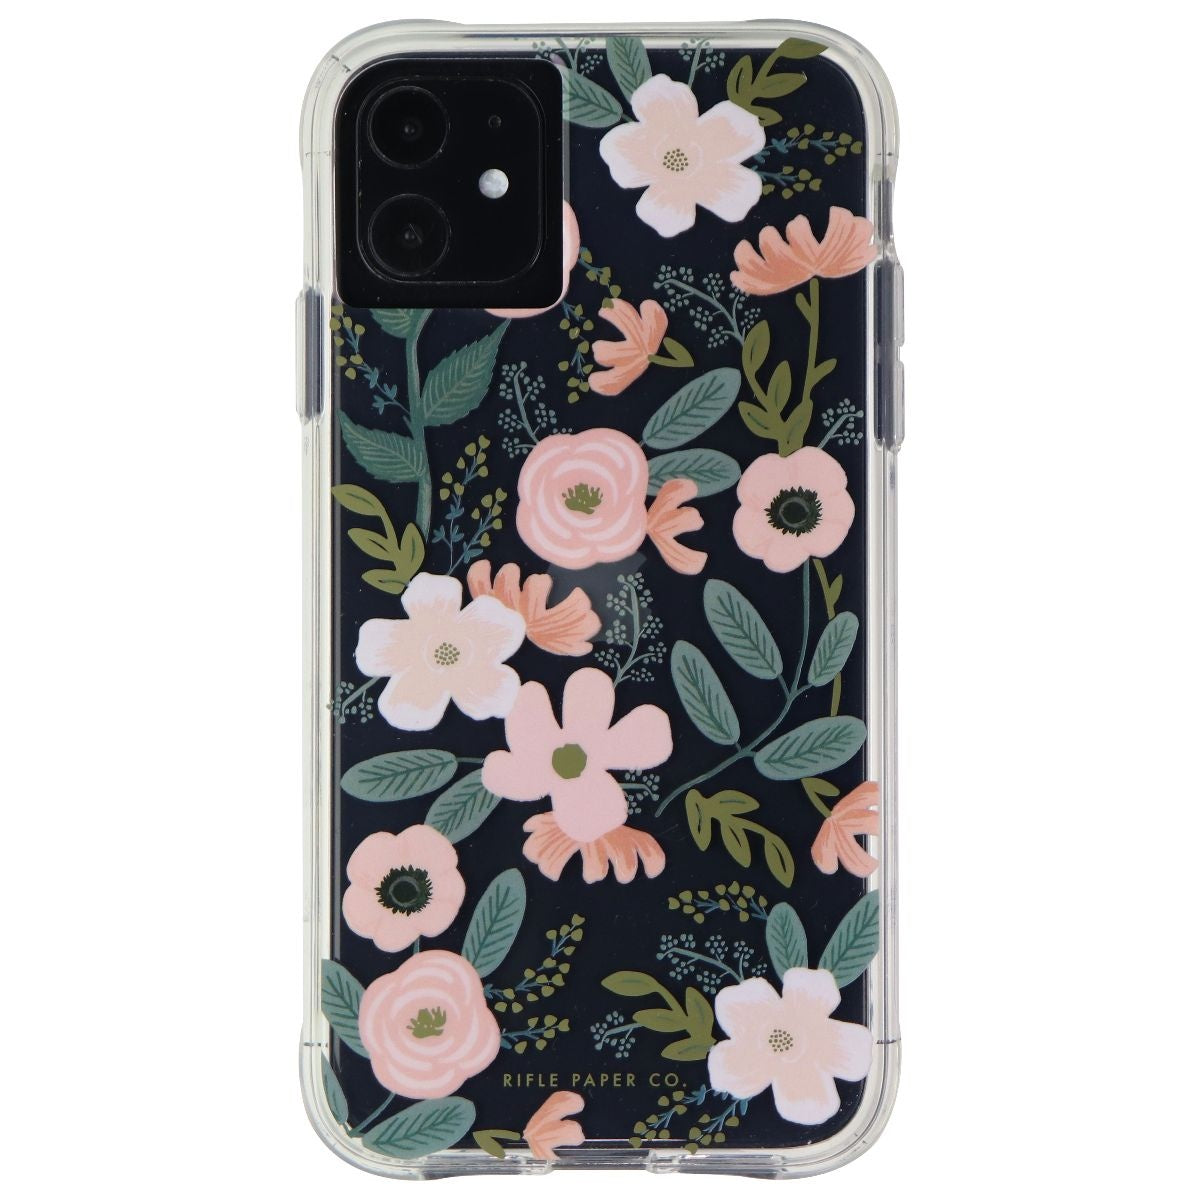 Rifle Paper Co. Eco-Friendly Case for iPhone 11 & iPhone XR - Clear/Wildflowers Cell Phone - Cases, Covers & Skins Rifle Paper Co.    - Simple Cell Bulk Wholesale Pricing - USA Seller